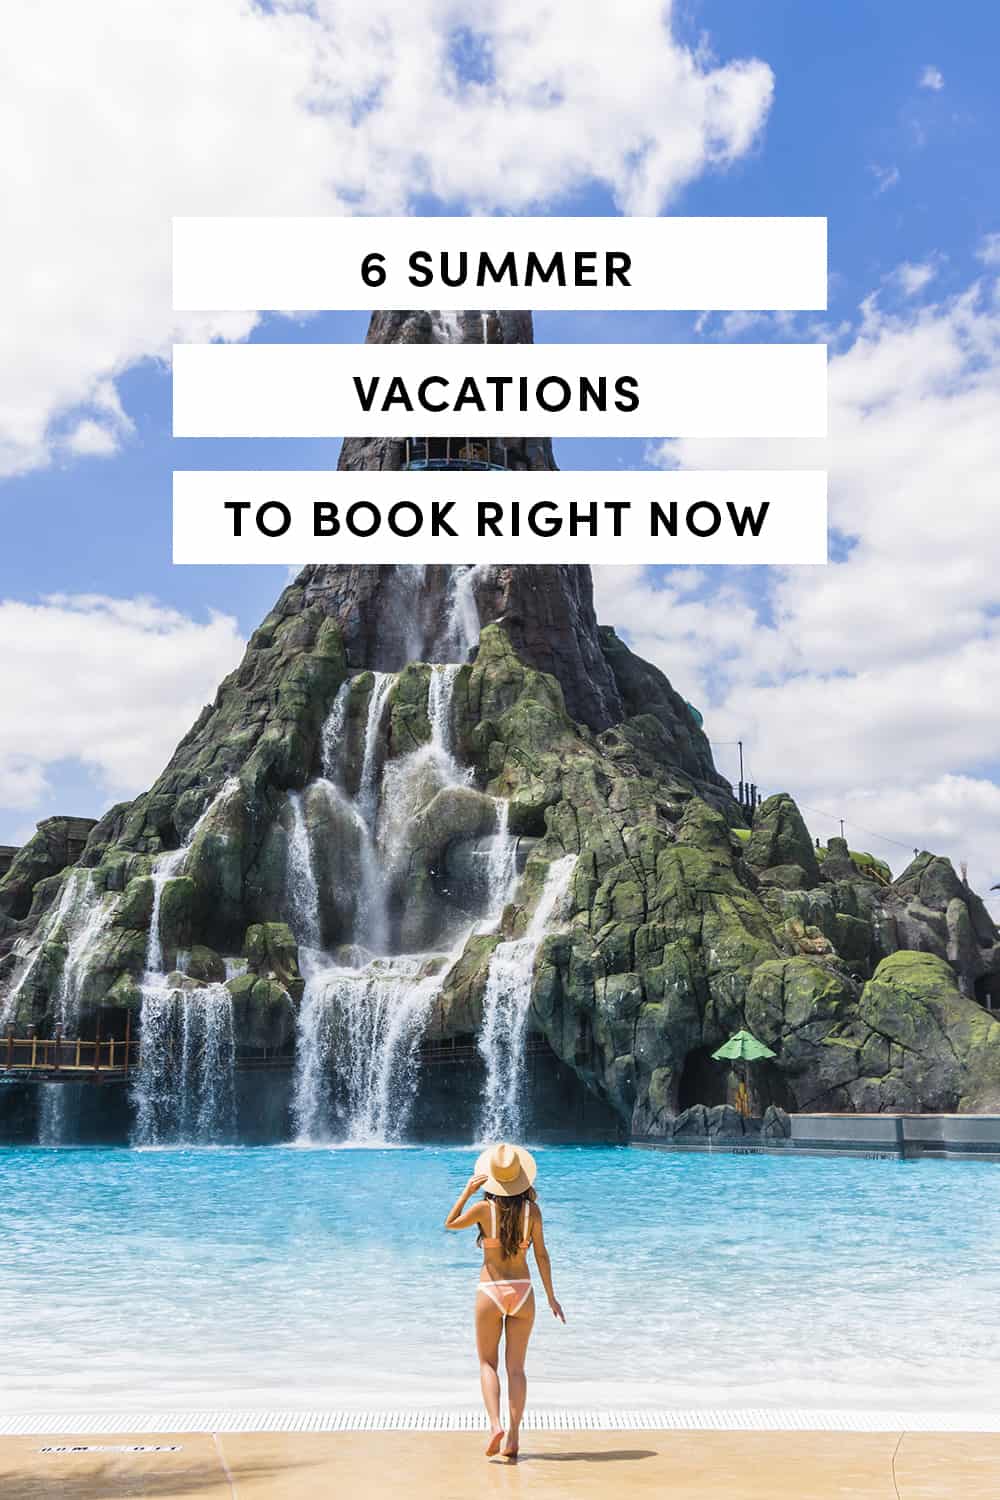 6 Summer Vacations To Book Right Now